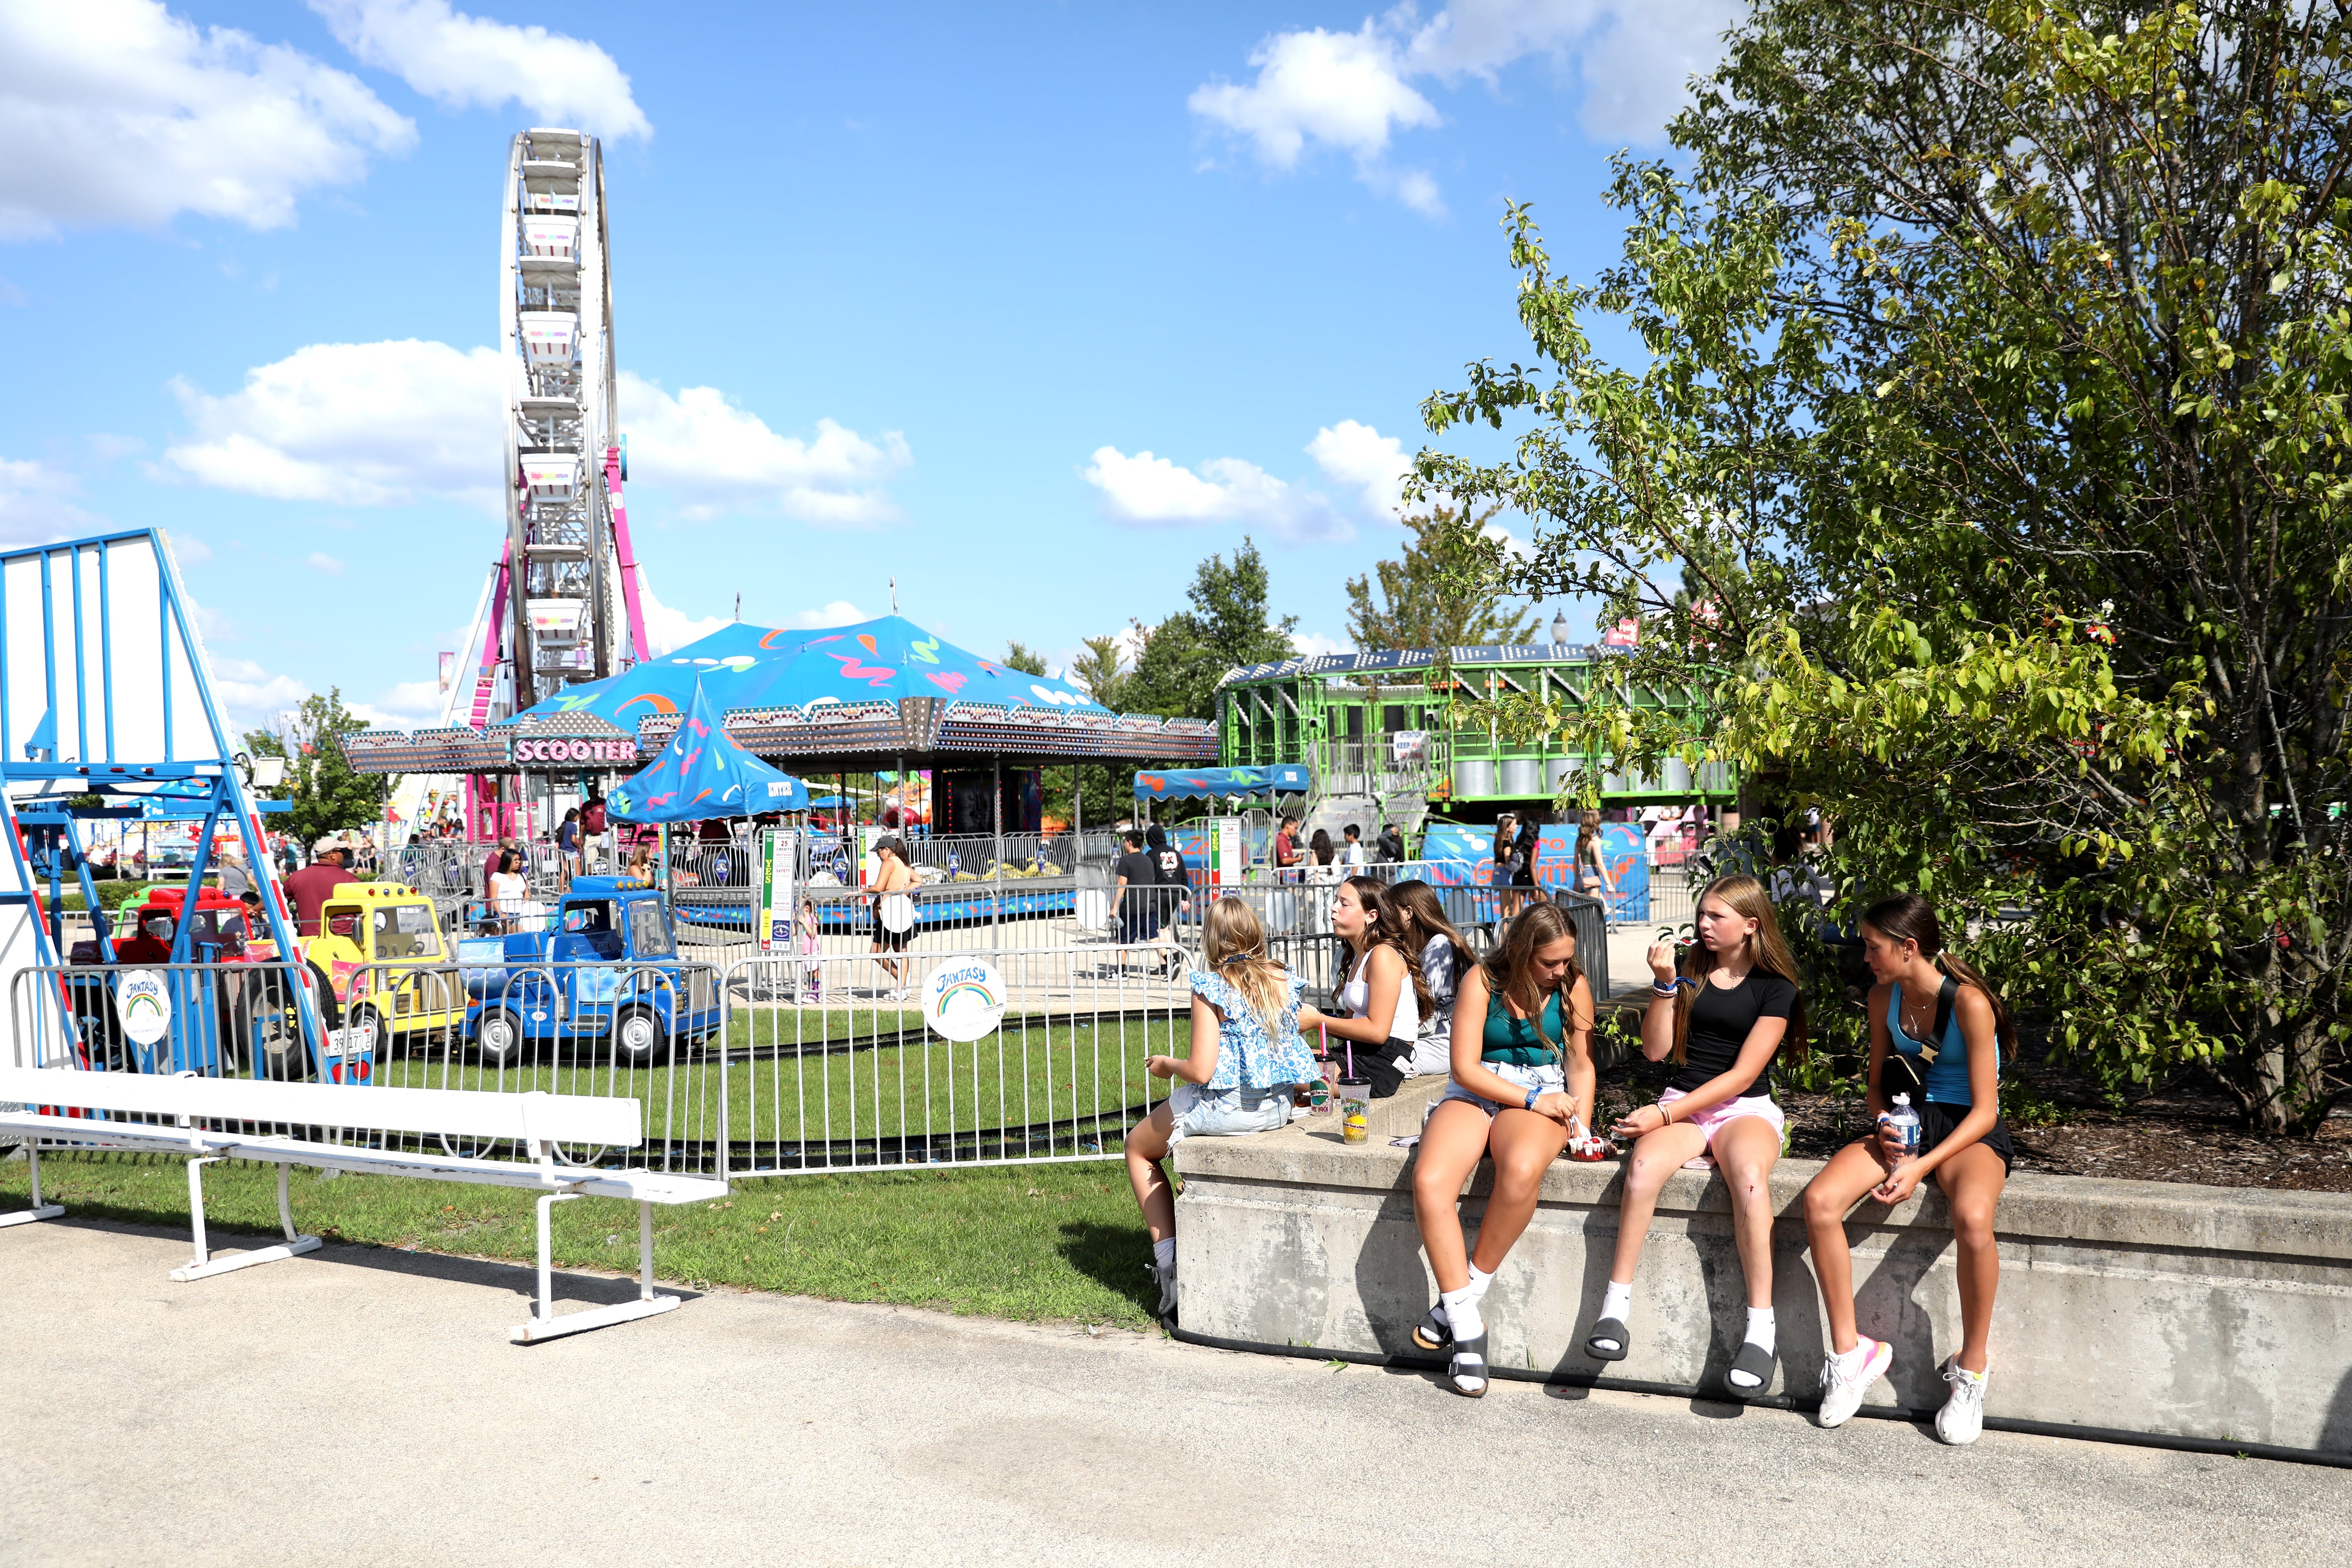 Photos: 155th Kane County Fair opens in St. Charles